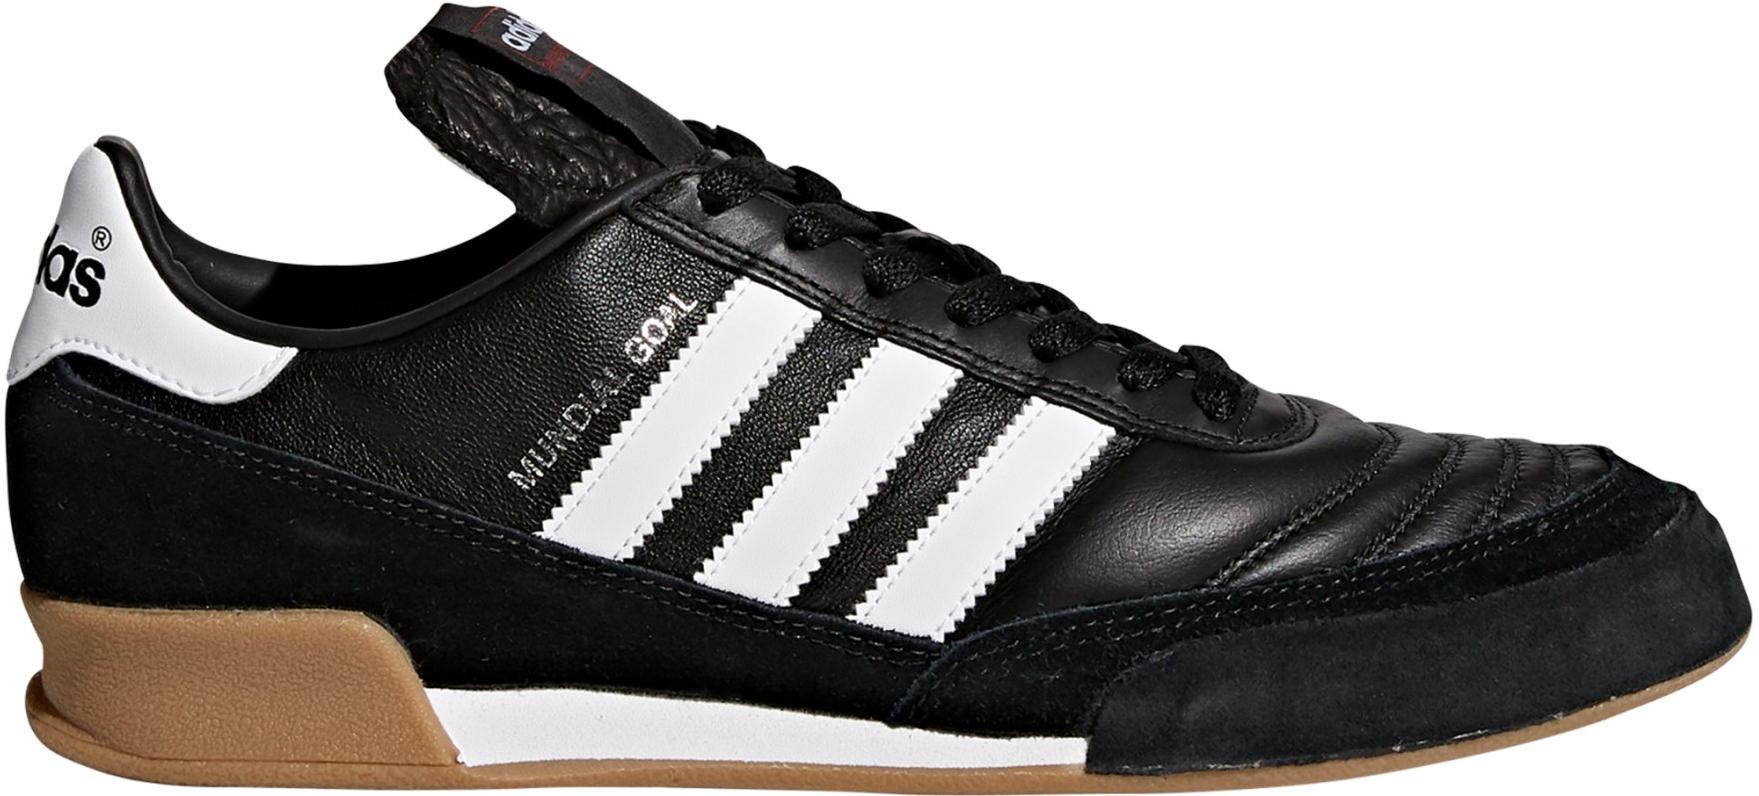 Indoor/court shoes adidas Mundial Goal IN - Top4Football.com